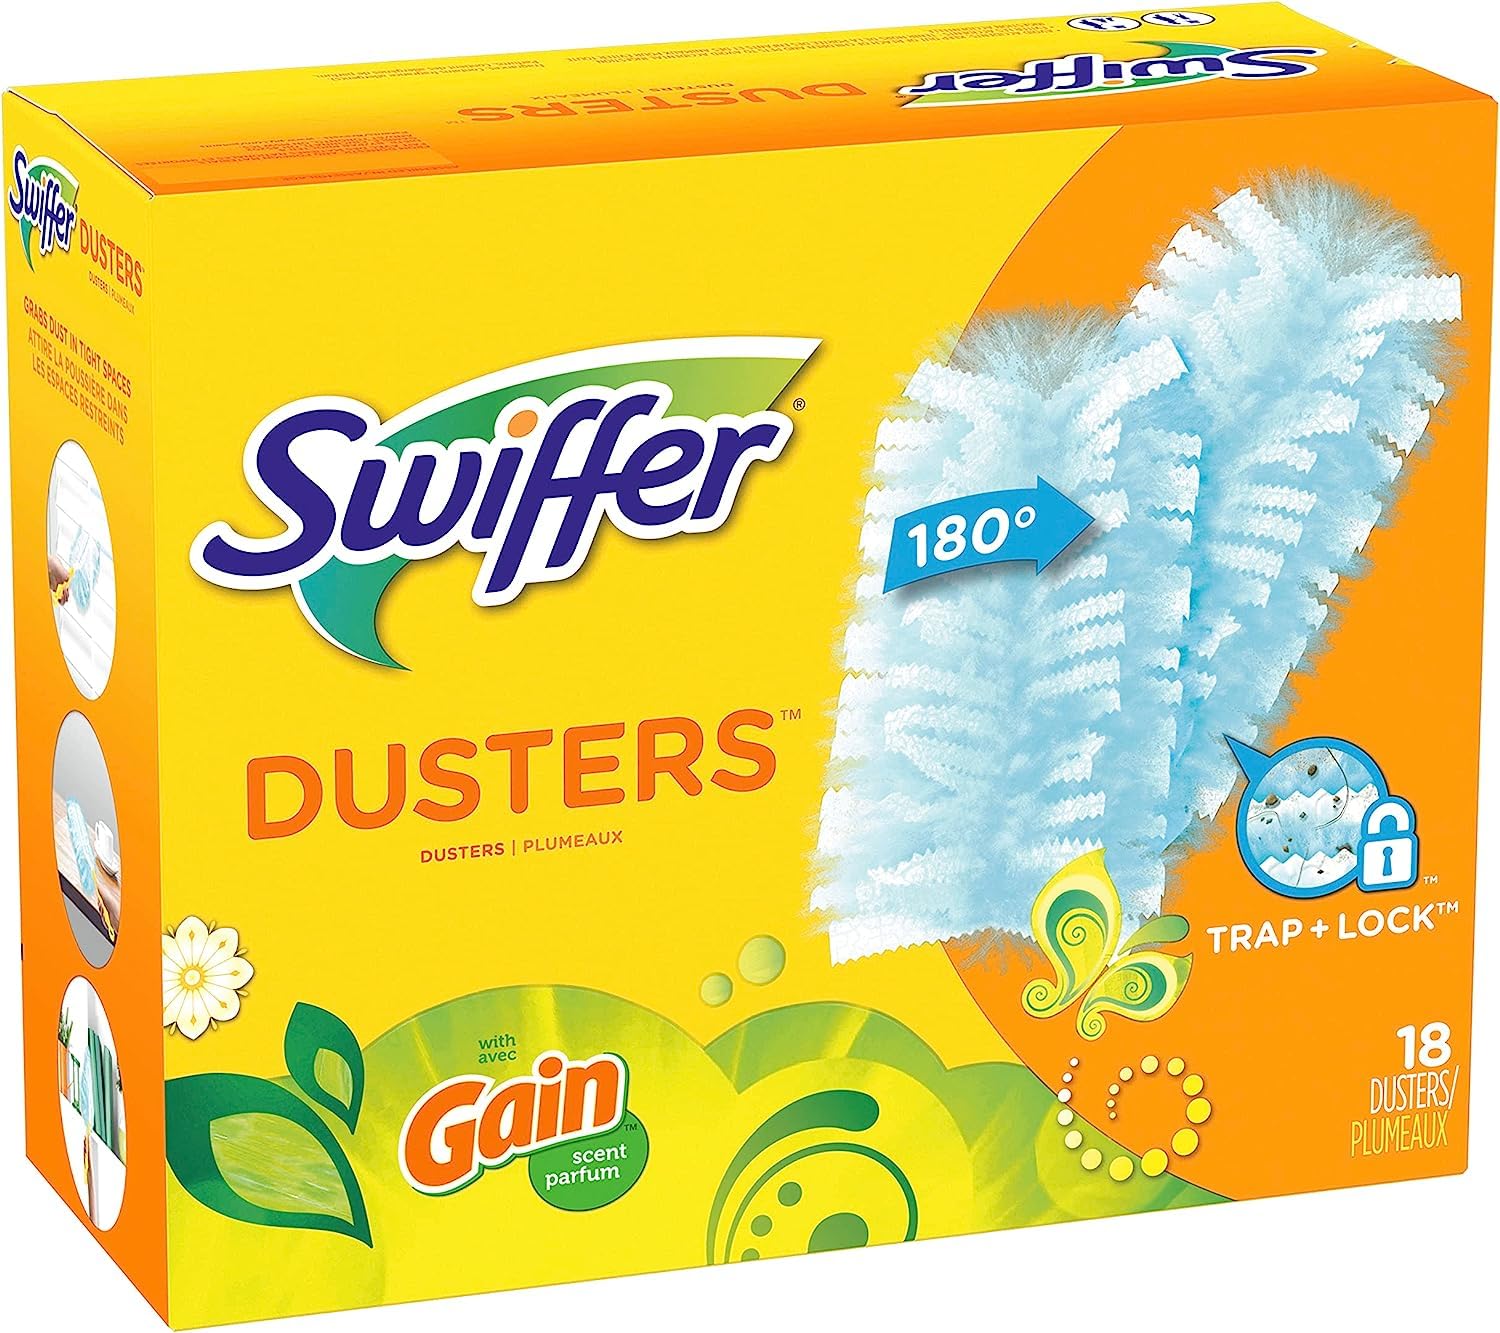 Swiffer 180 Dusters, Ceiling Fan Duster, Multi Surface Refills with Gain Scent, 18 Count